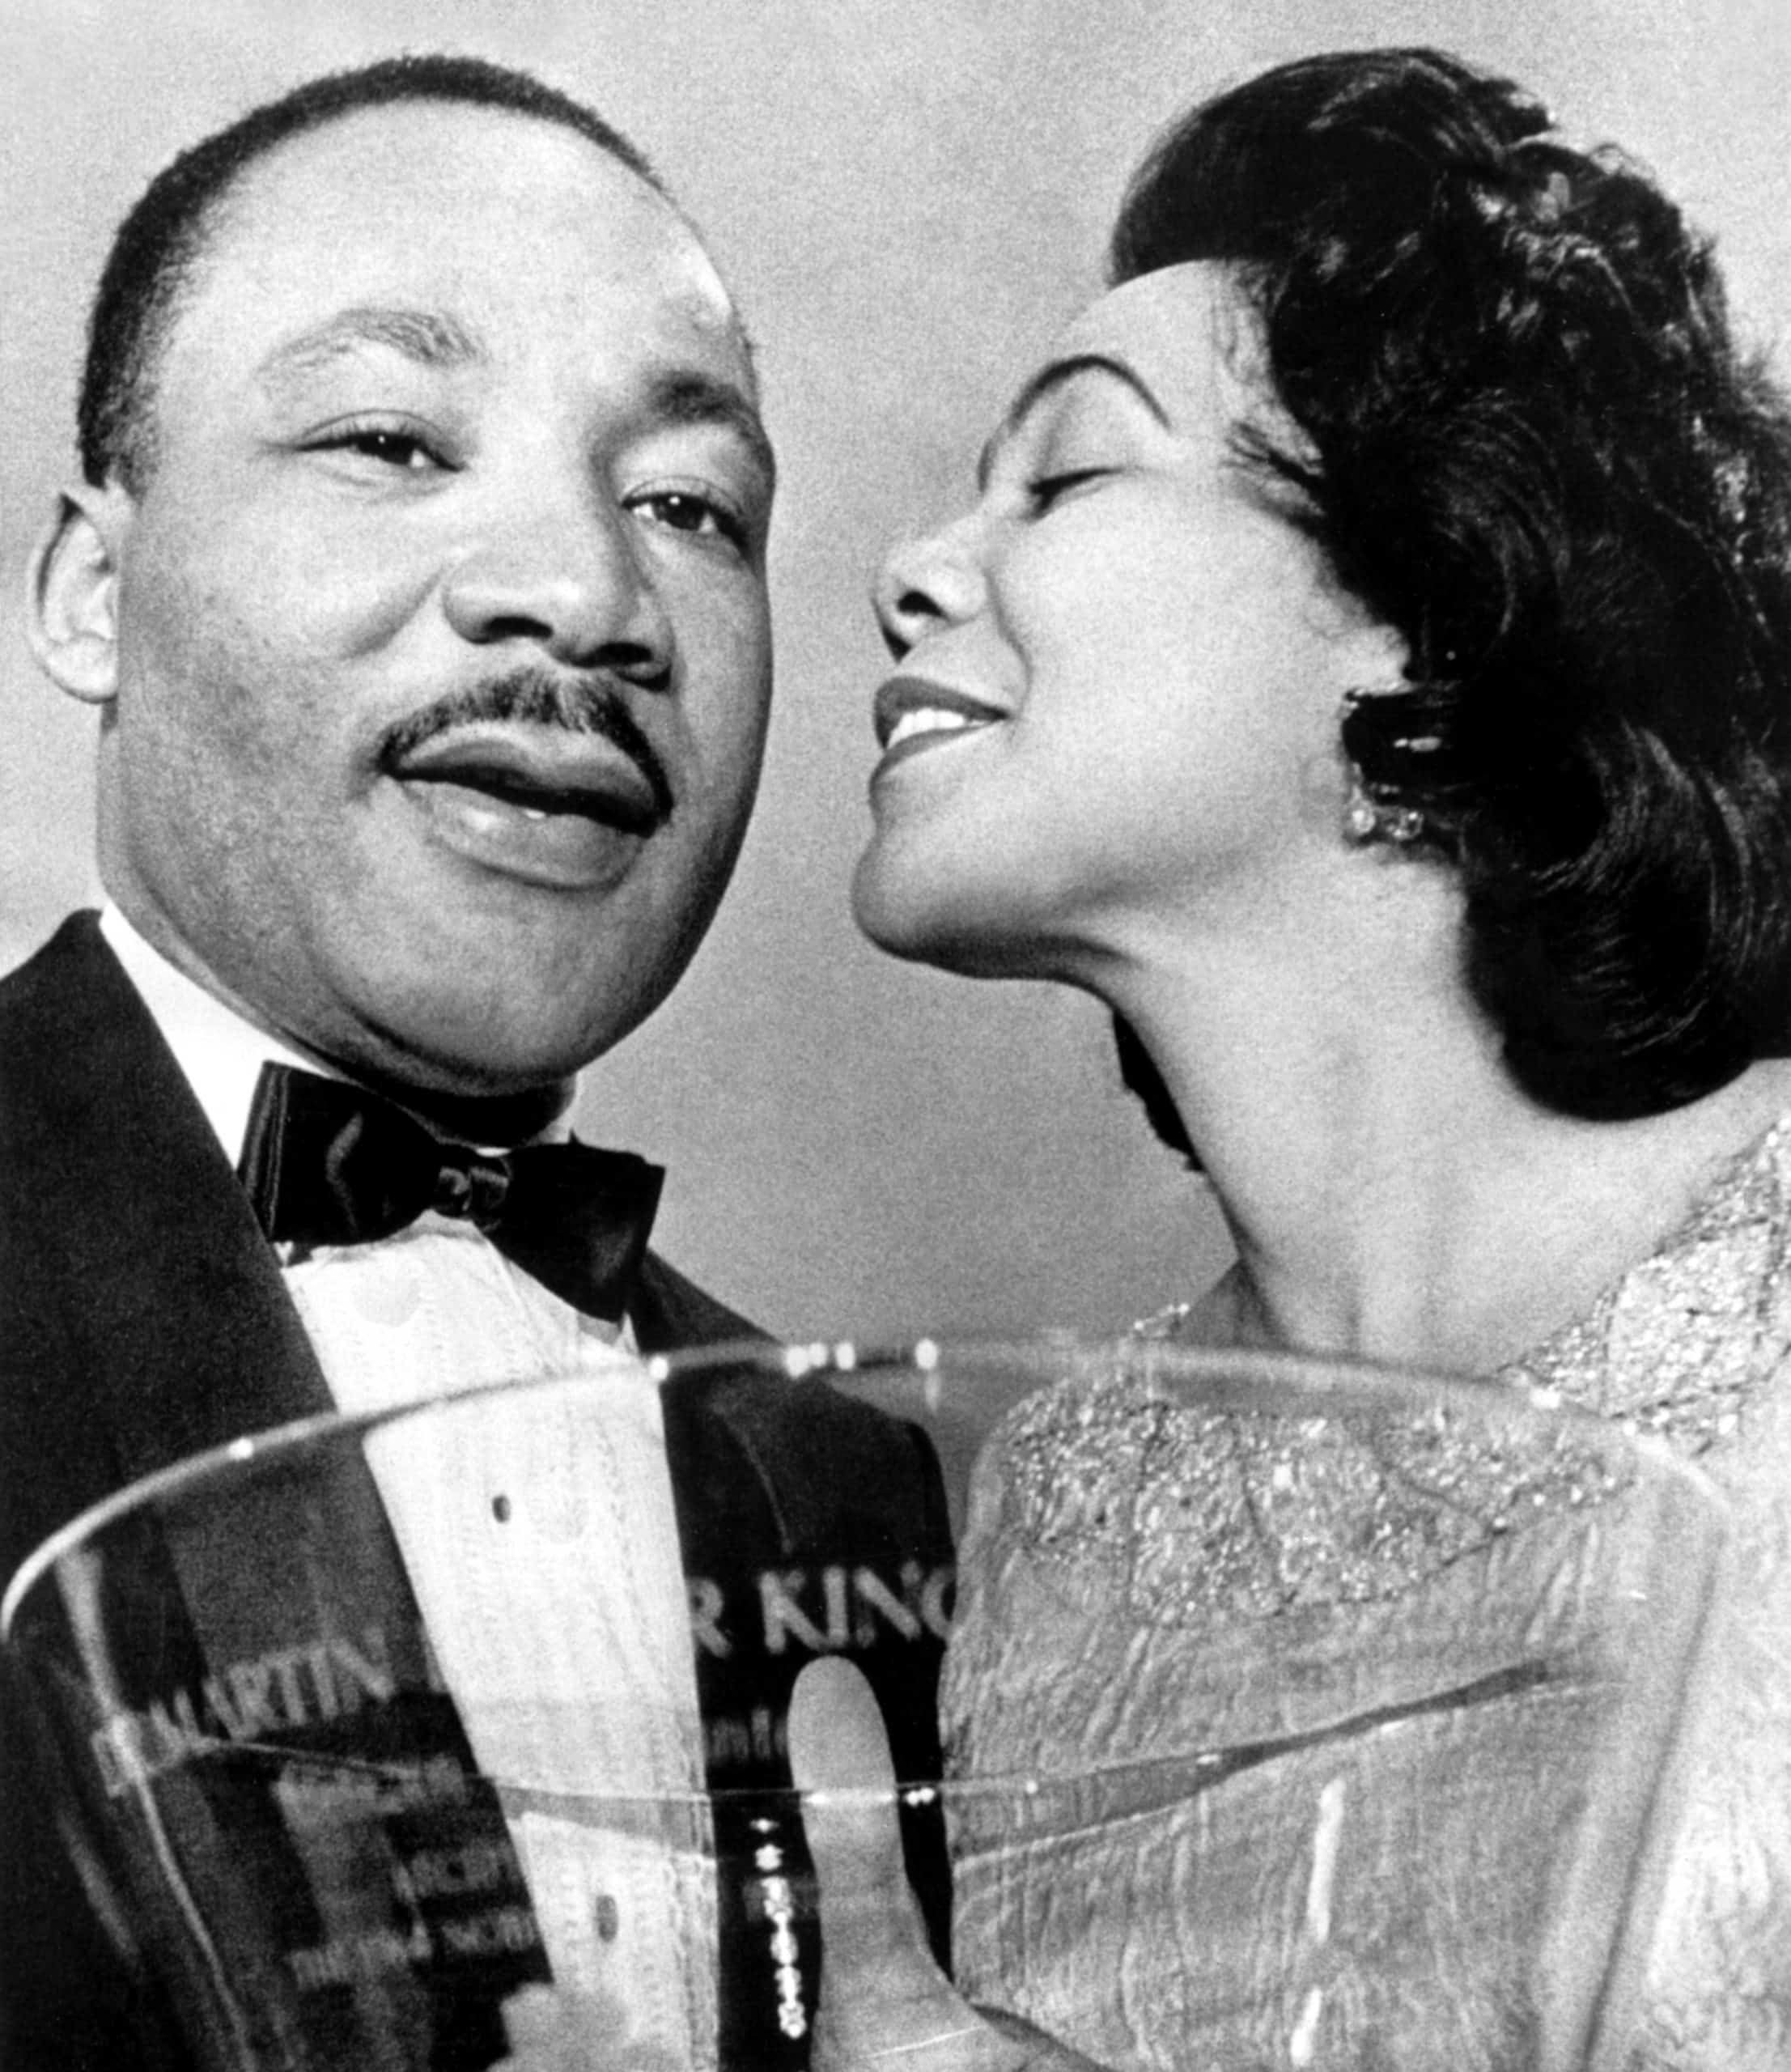 Dr. Martin Luther King Jr., being congratulated by wife Coretta Scott King, after being presented with a Steuben-Glass Bowl Award, Atlanta, GA, January 27, 1965